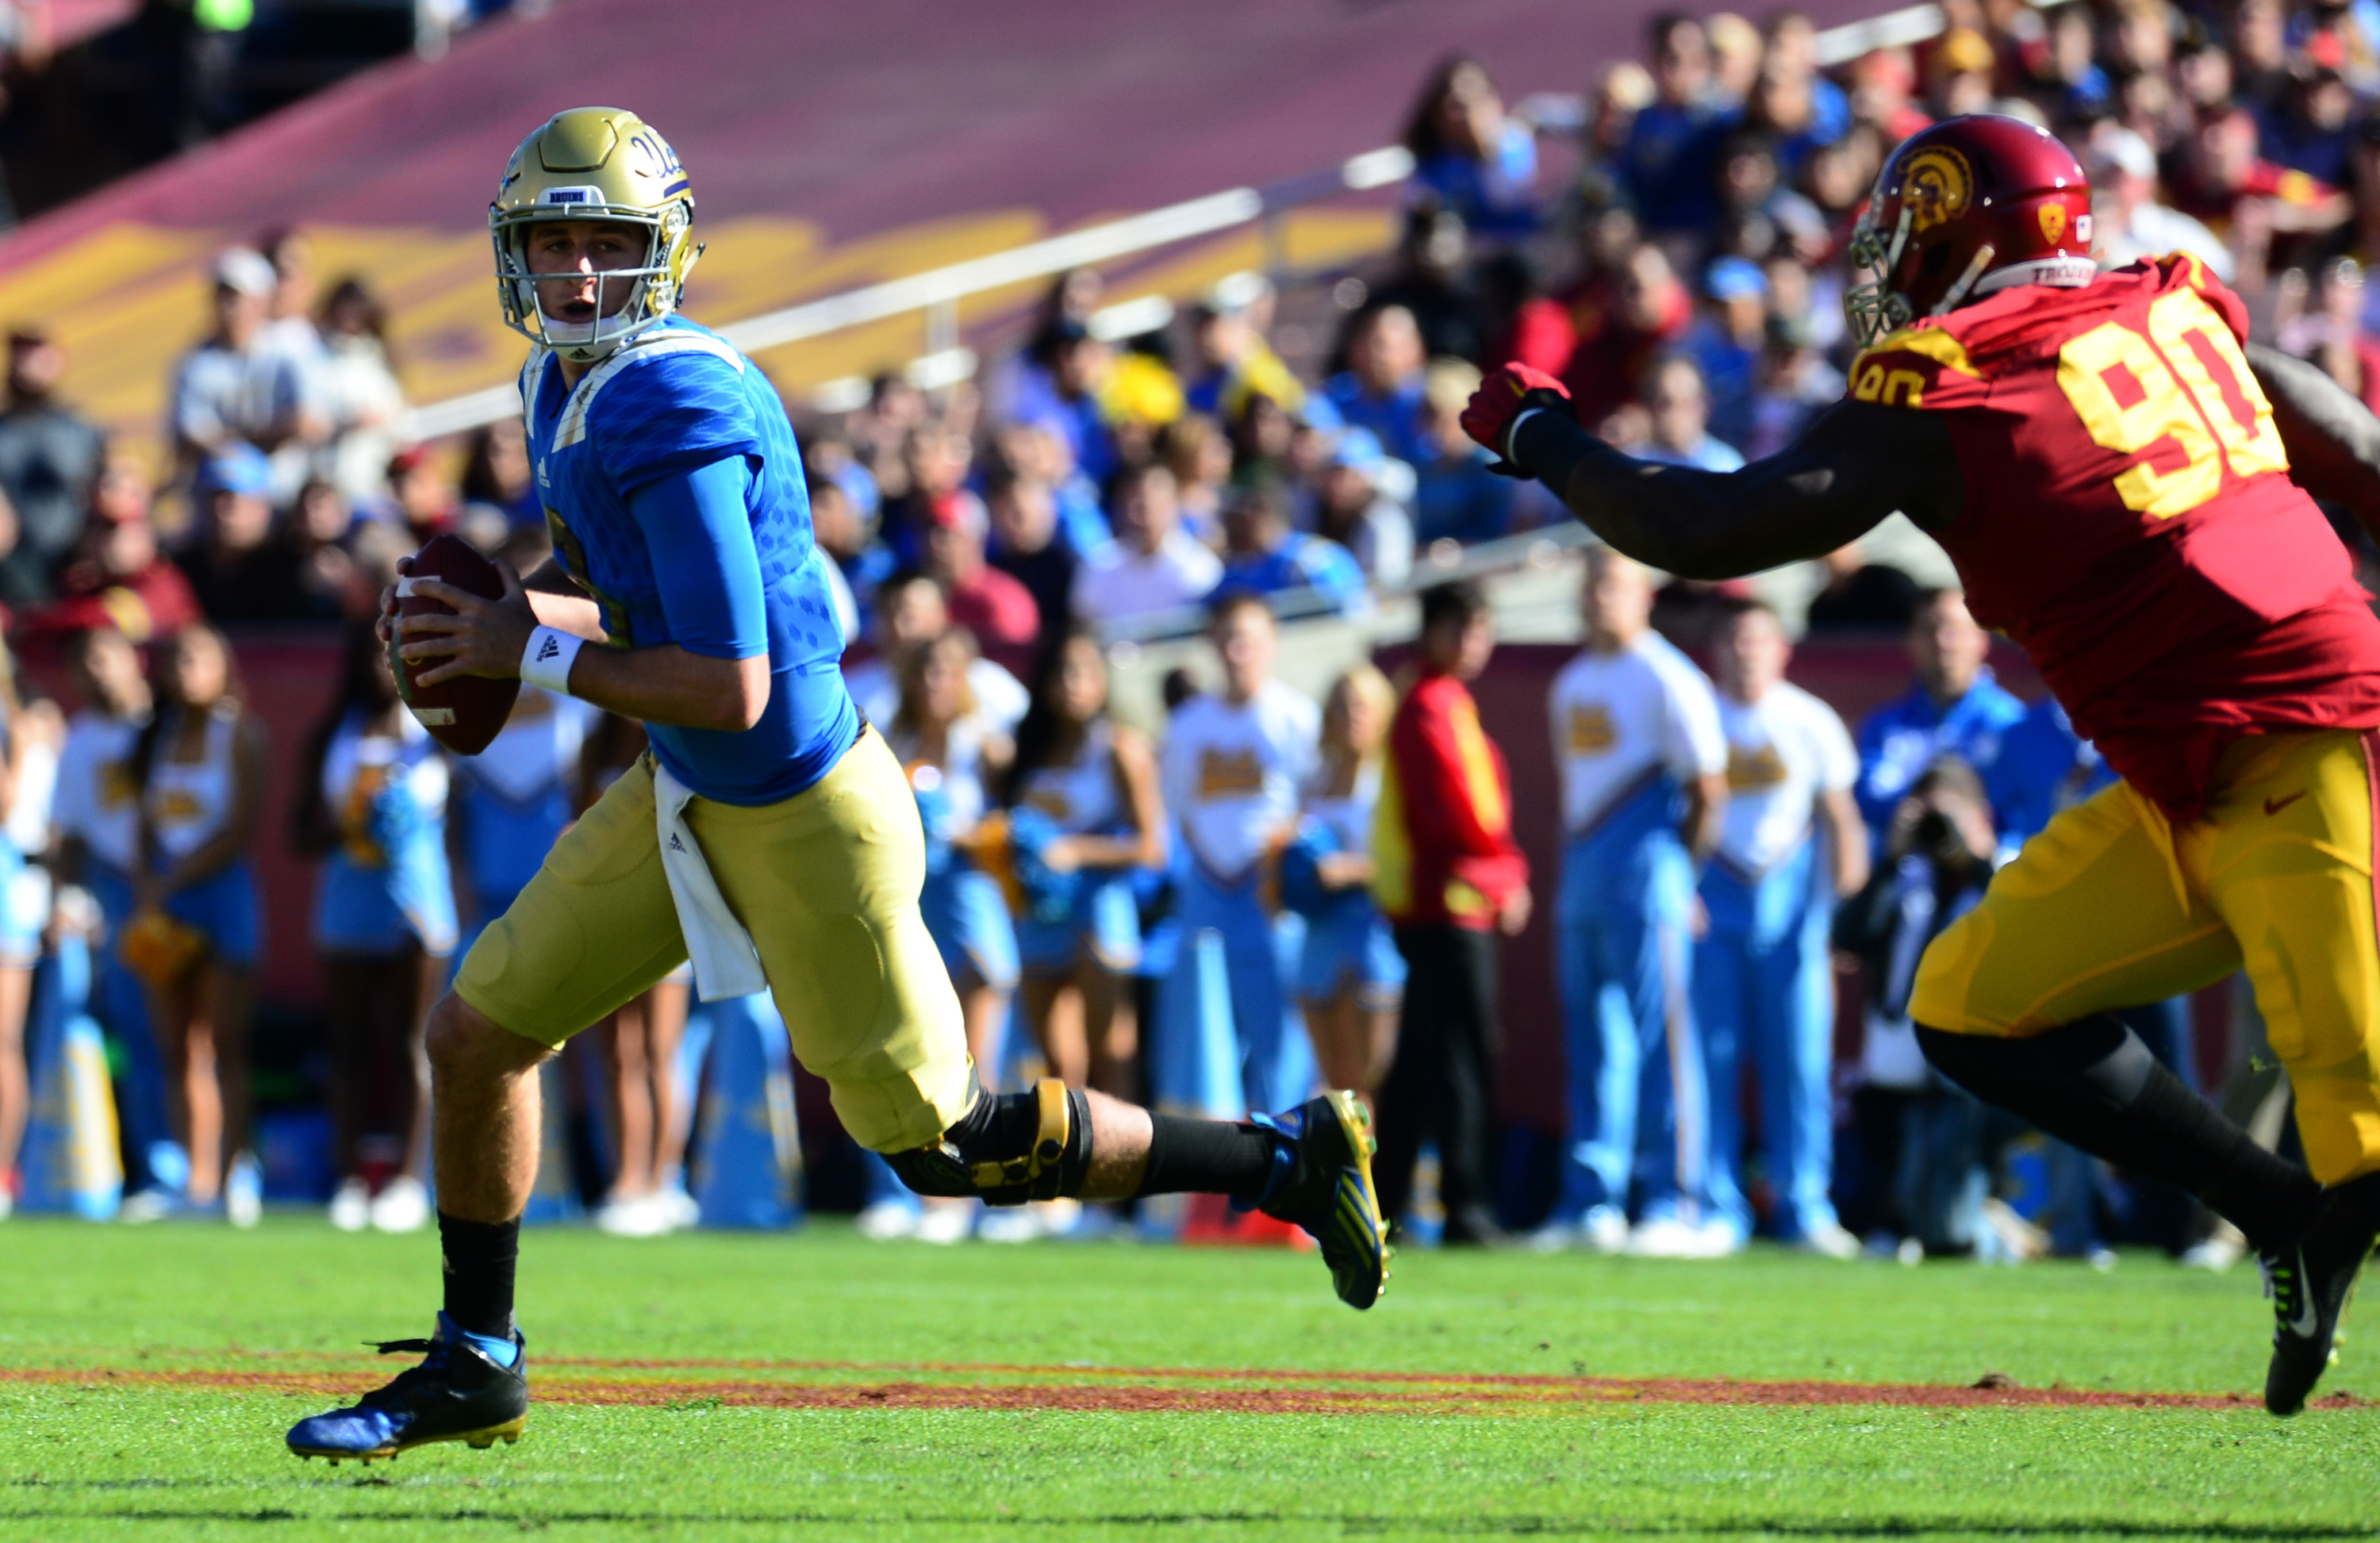 UCLA quarterback Josh Rosen (3) had three turnovers in Saturday's loss to USC, but still finished as the Pac-12's best offensive freshman. (Keith Birmingham/Staff)